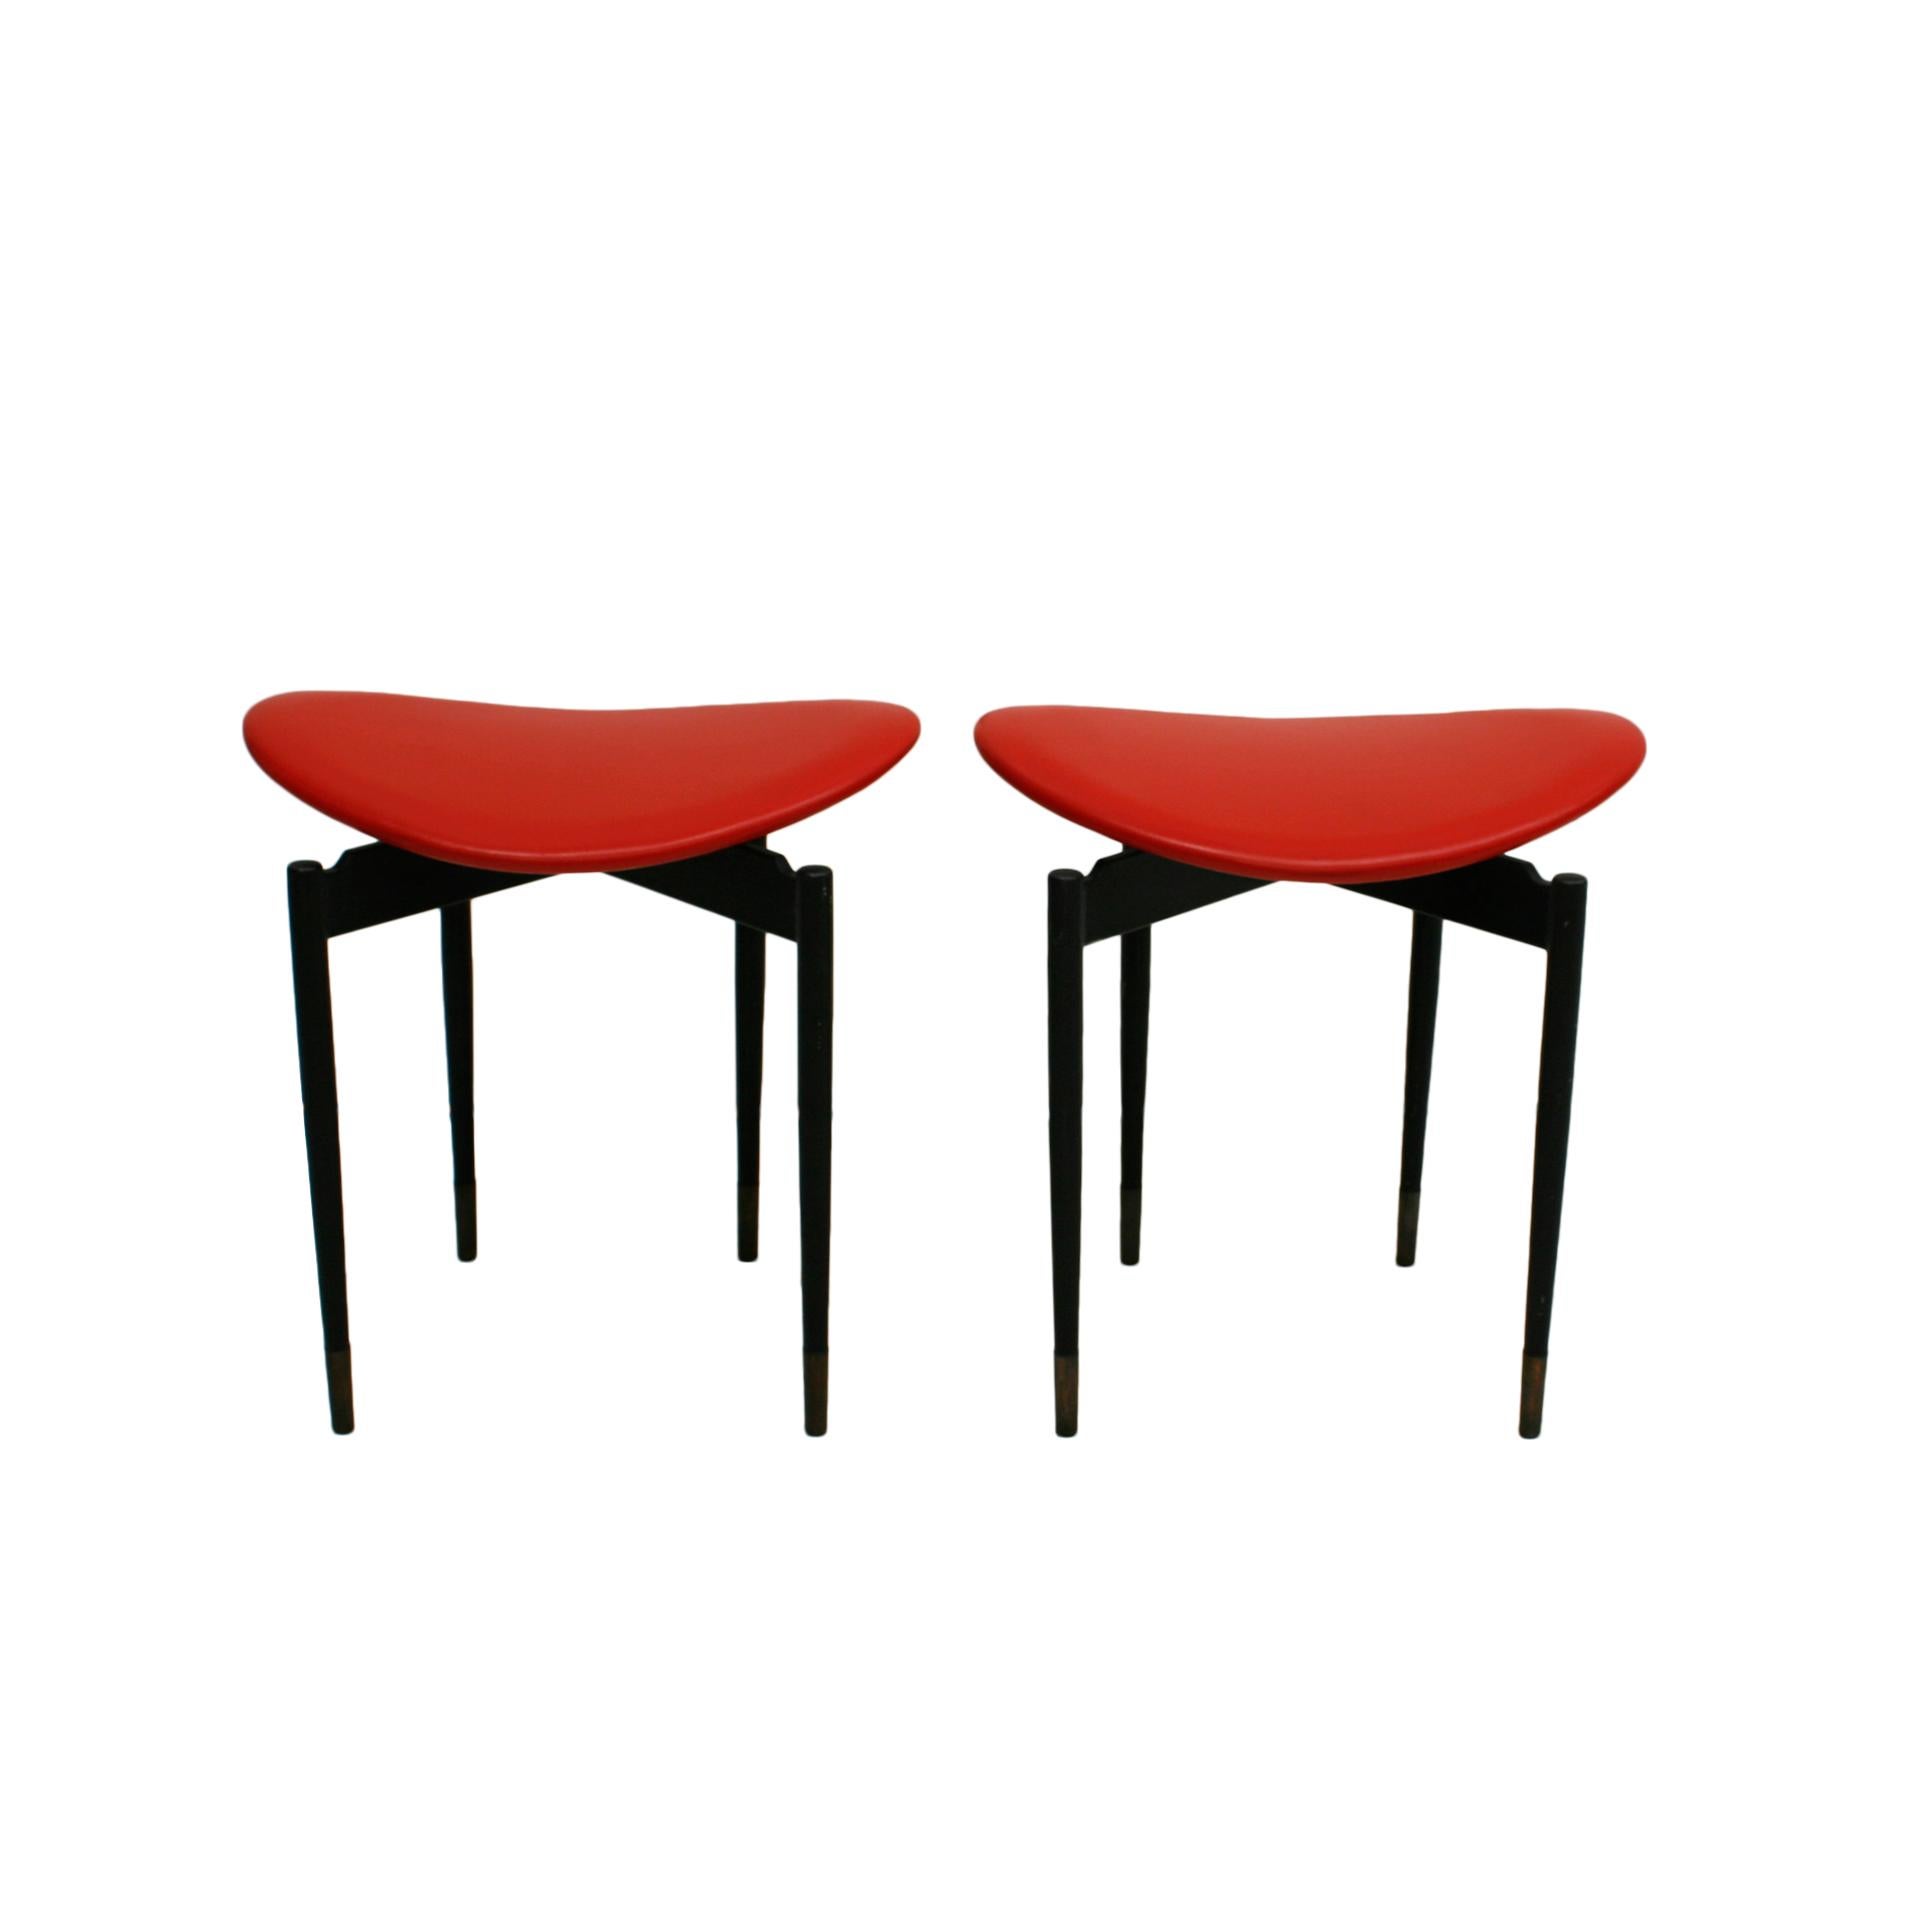 Set of two stools mod. 